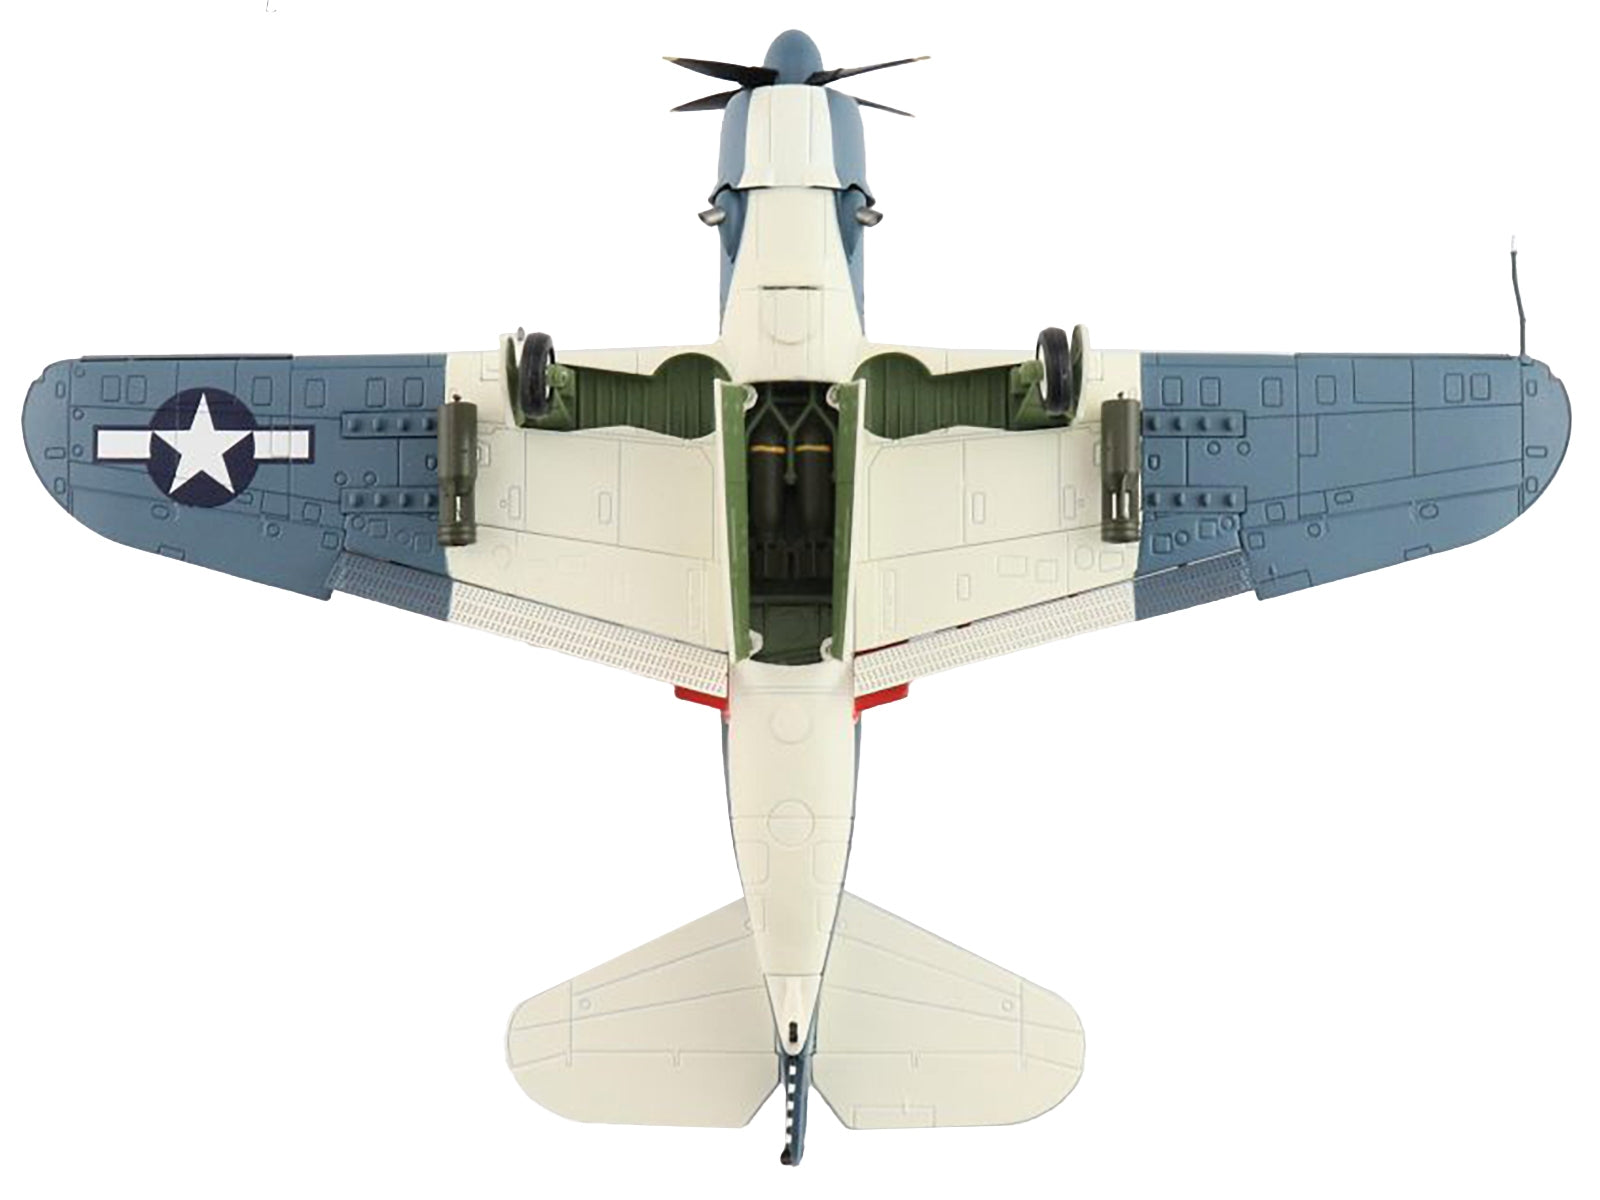 Curtiss SB2C-4 Helldiver Bomber Aircraft "VB-18 USS Intrepid" (1944) United States Navy "Air Power Series" 1/72 Diecast Model by Hobby Master